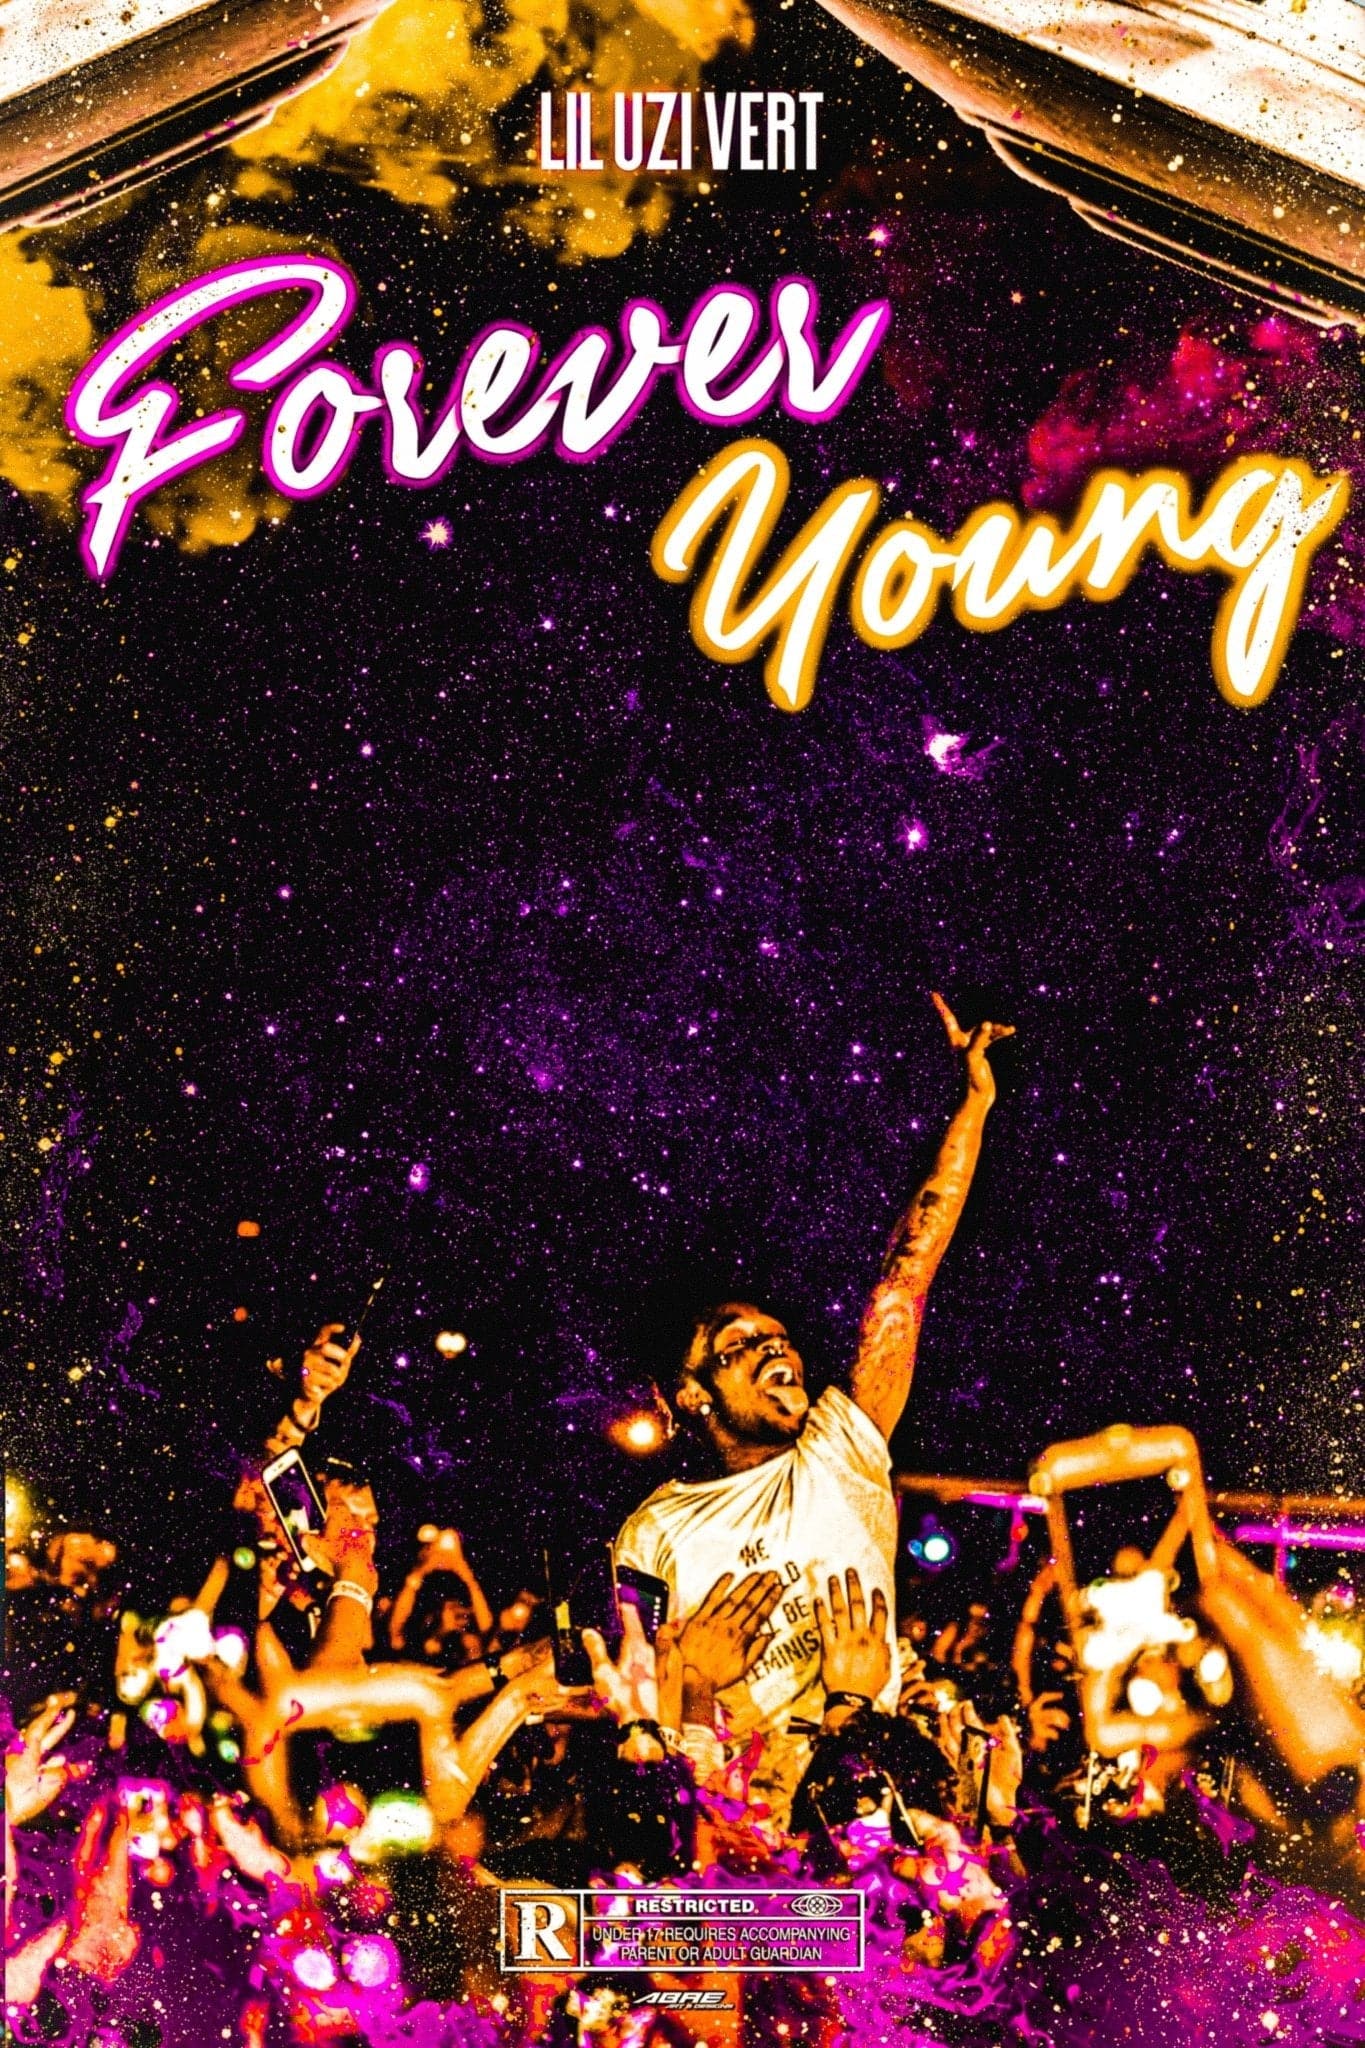 Lil Uzi Vert ‘Forever Young’ Poster - Posters Plug